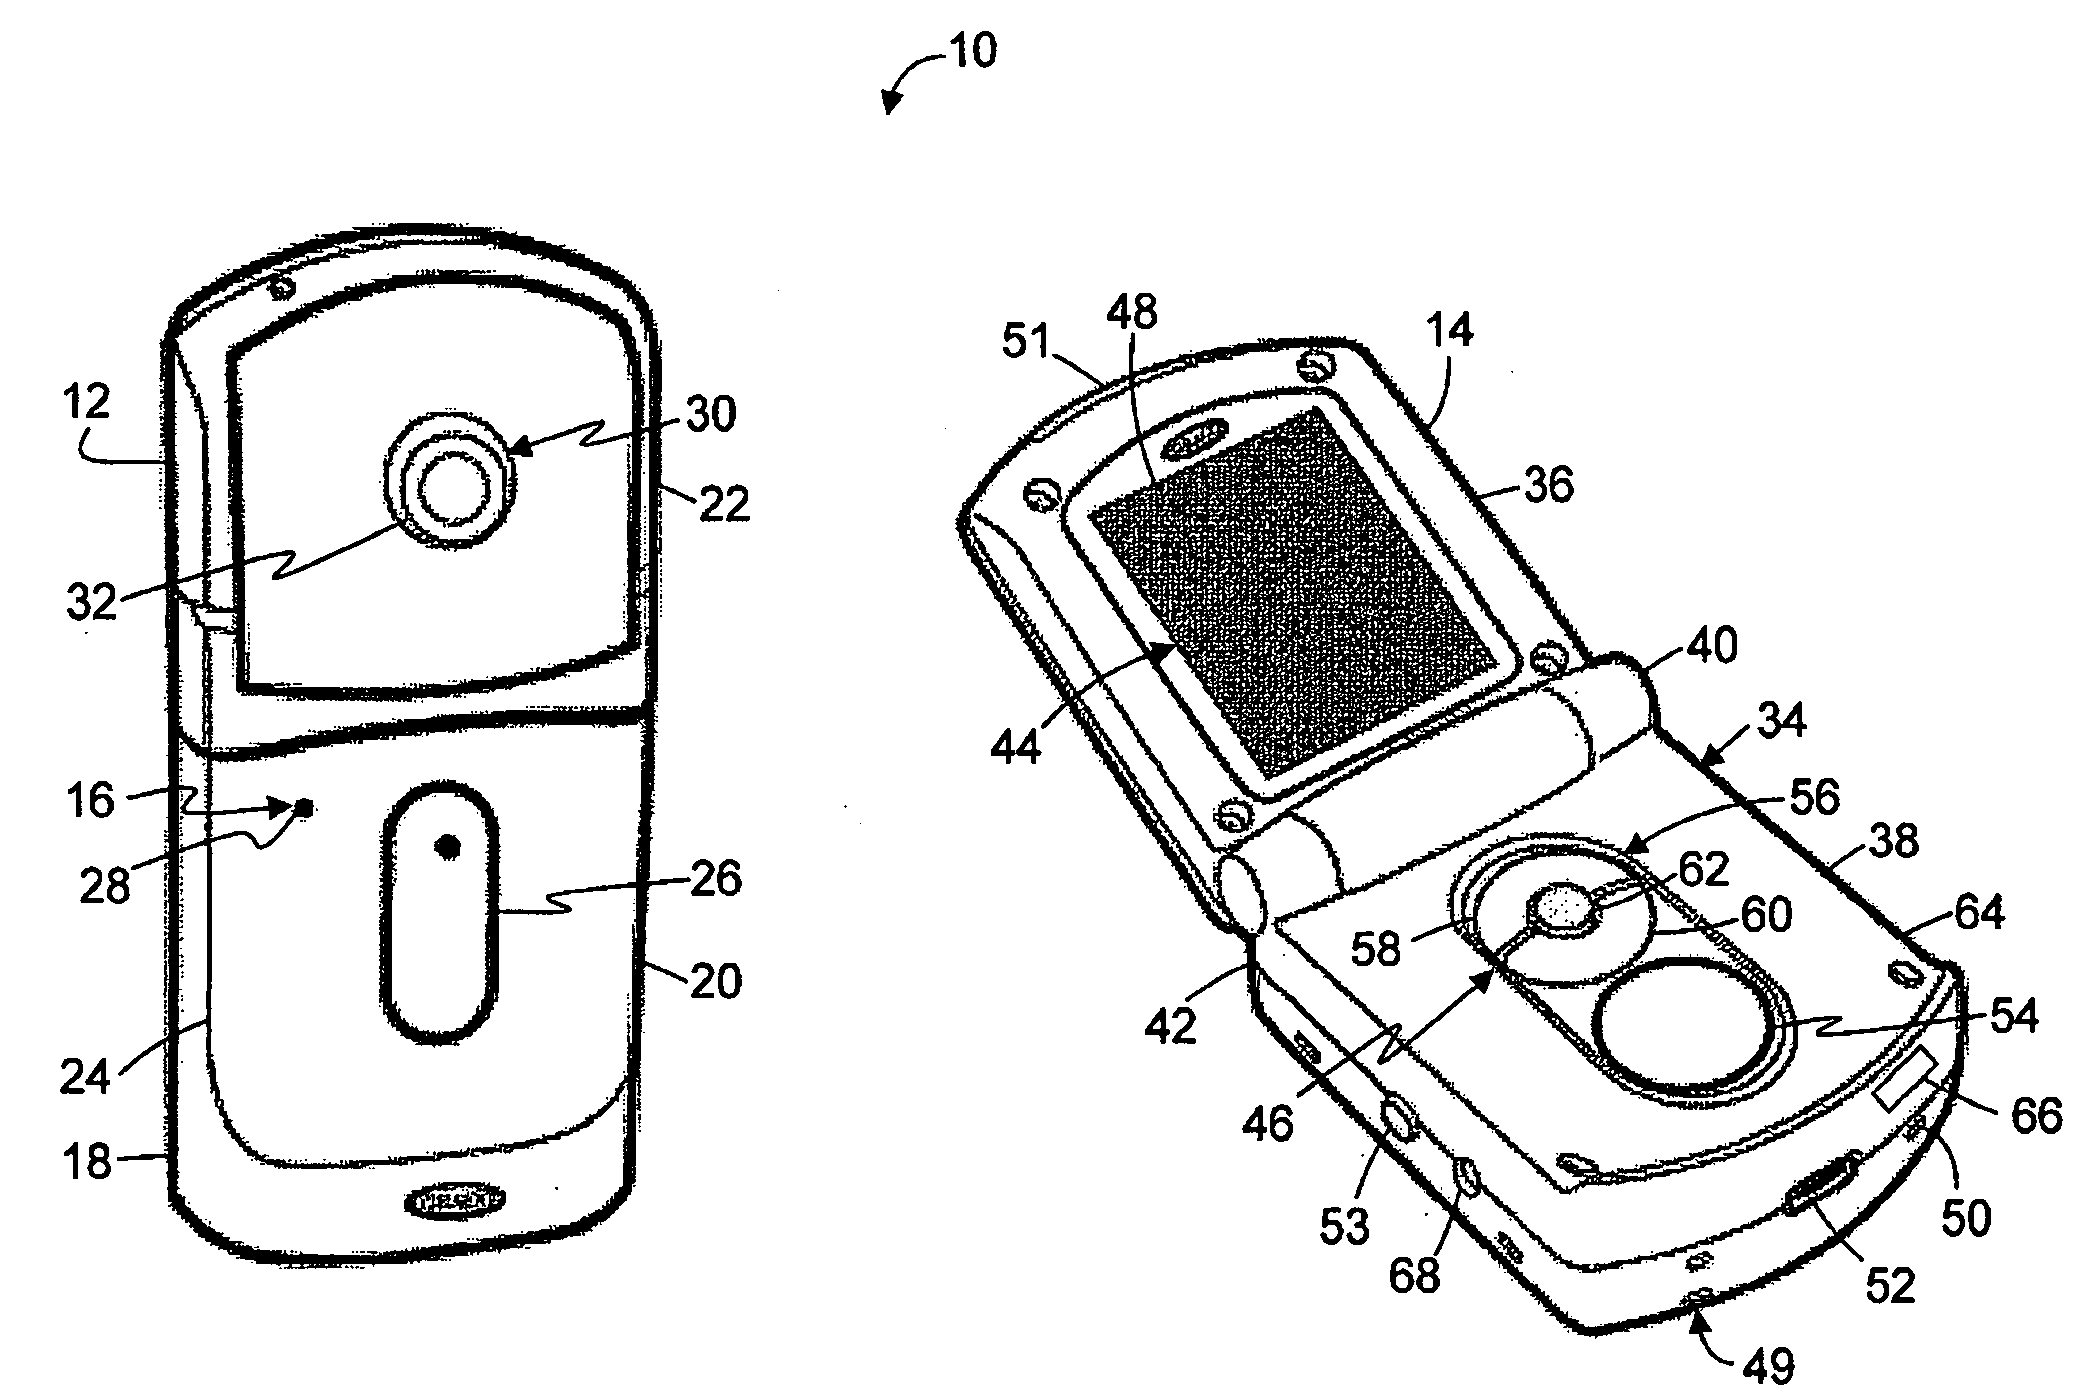 Child Monitor System with Content Data Storage